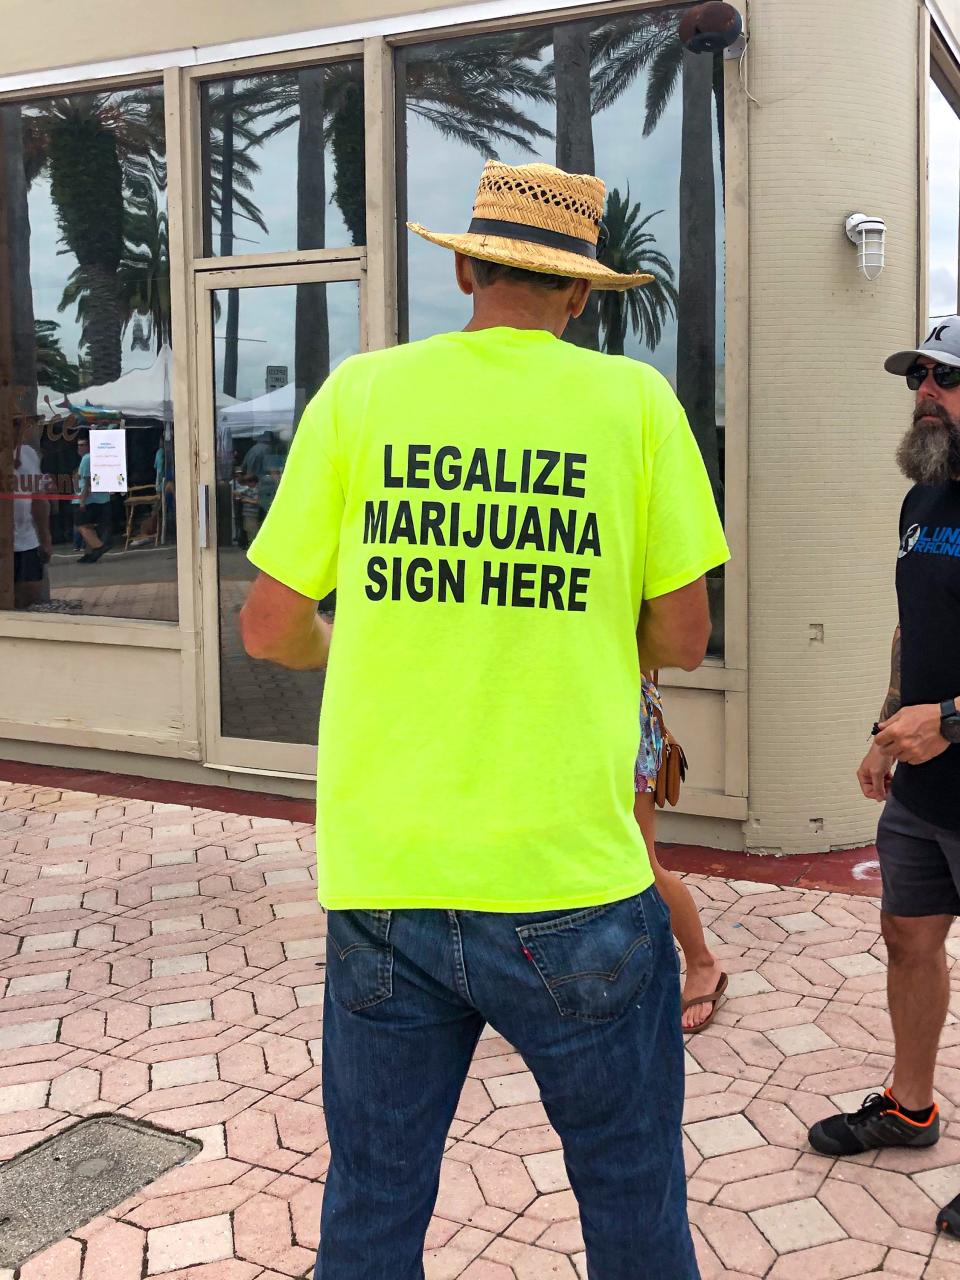 Signature gatherer in downtown Daytona Beach. He was working for a recreational marijuana amendment disallowed by the Florida Supreme Court in 2019.